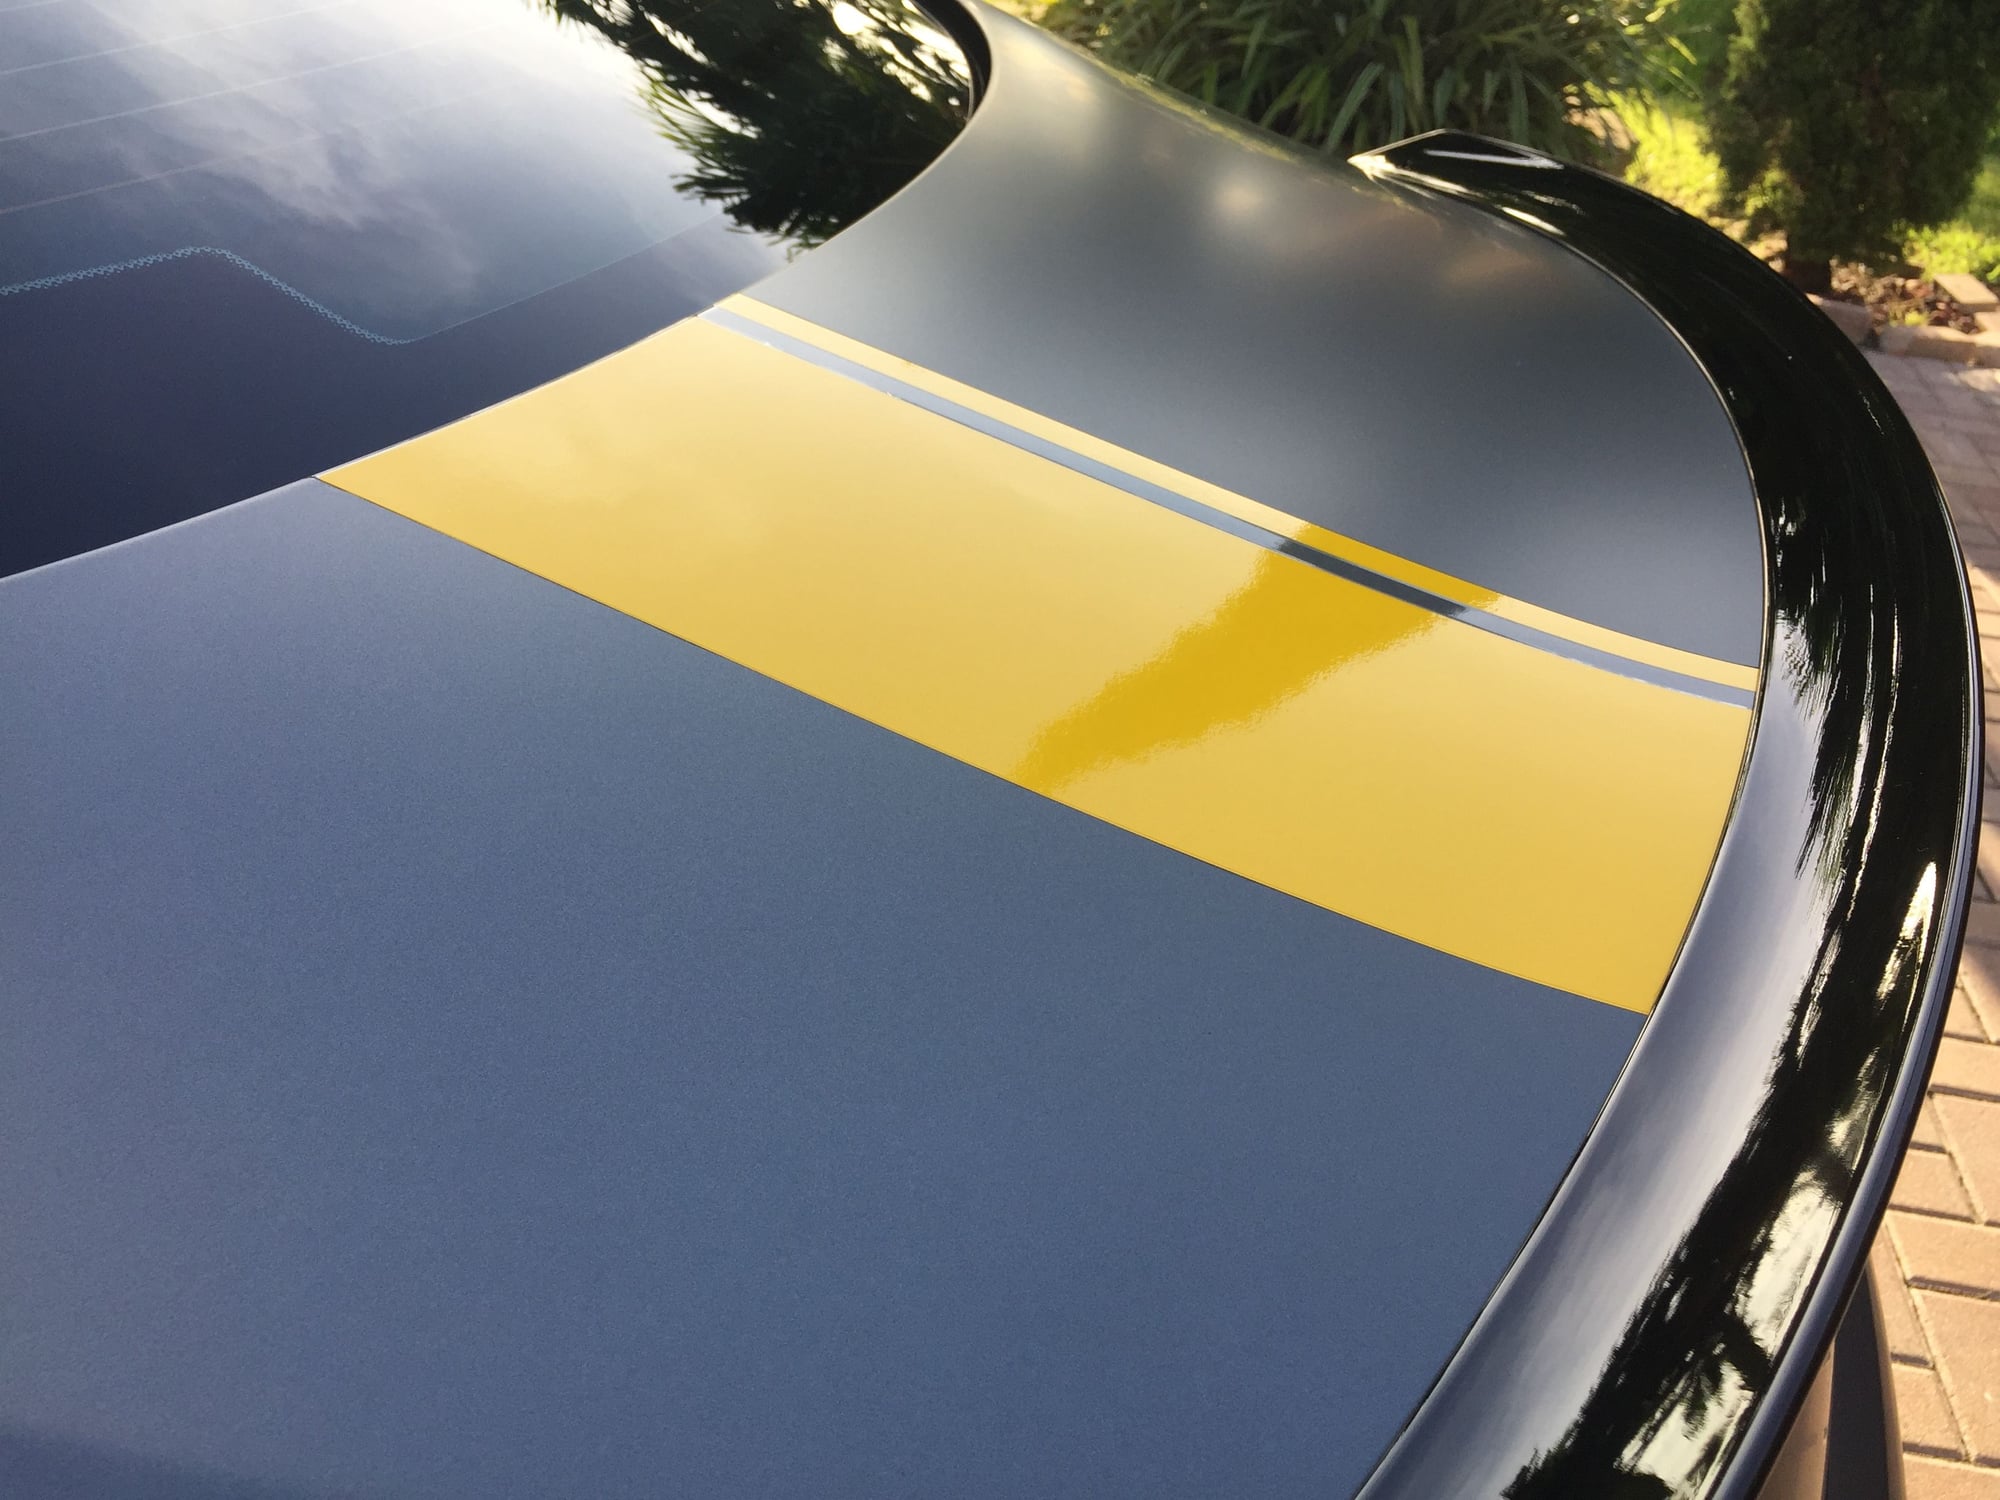 Gloss or Matte? XPEL Paint Protection Film Has The Seattle Area